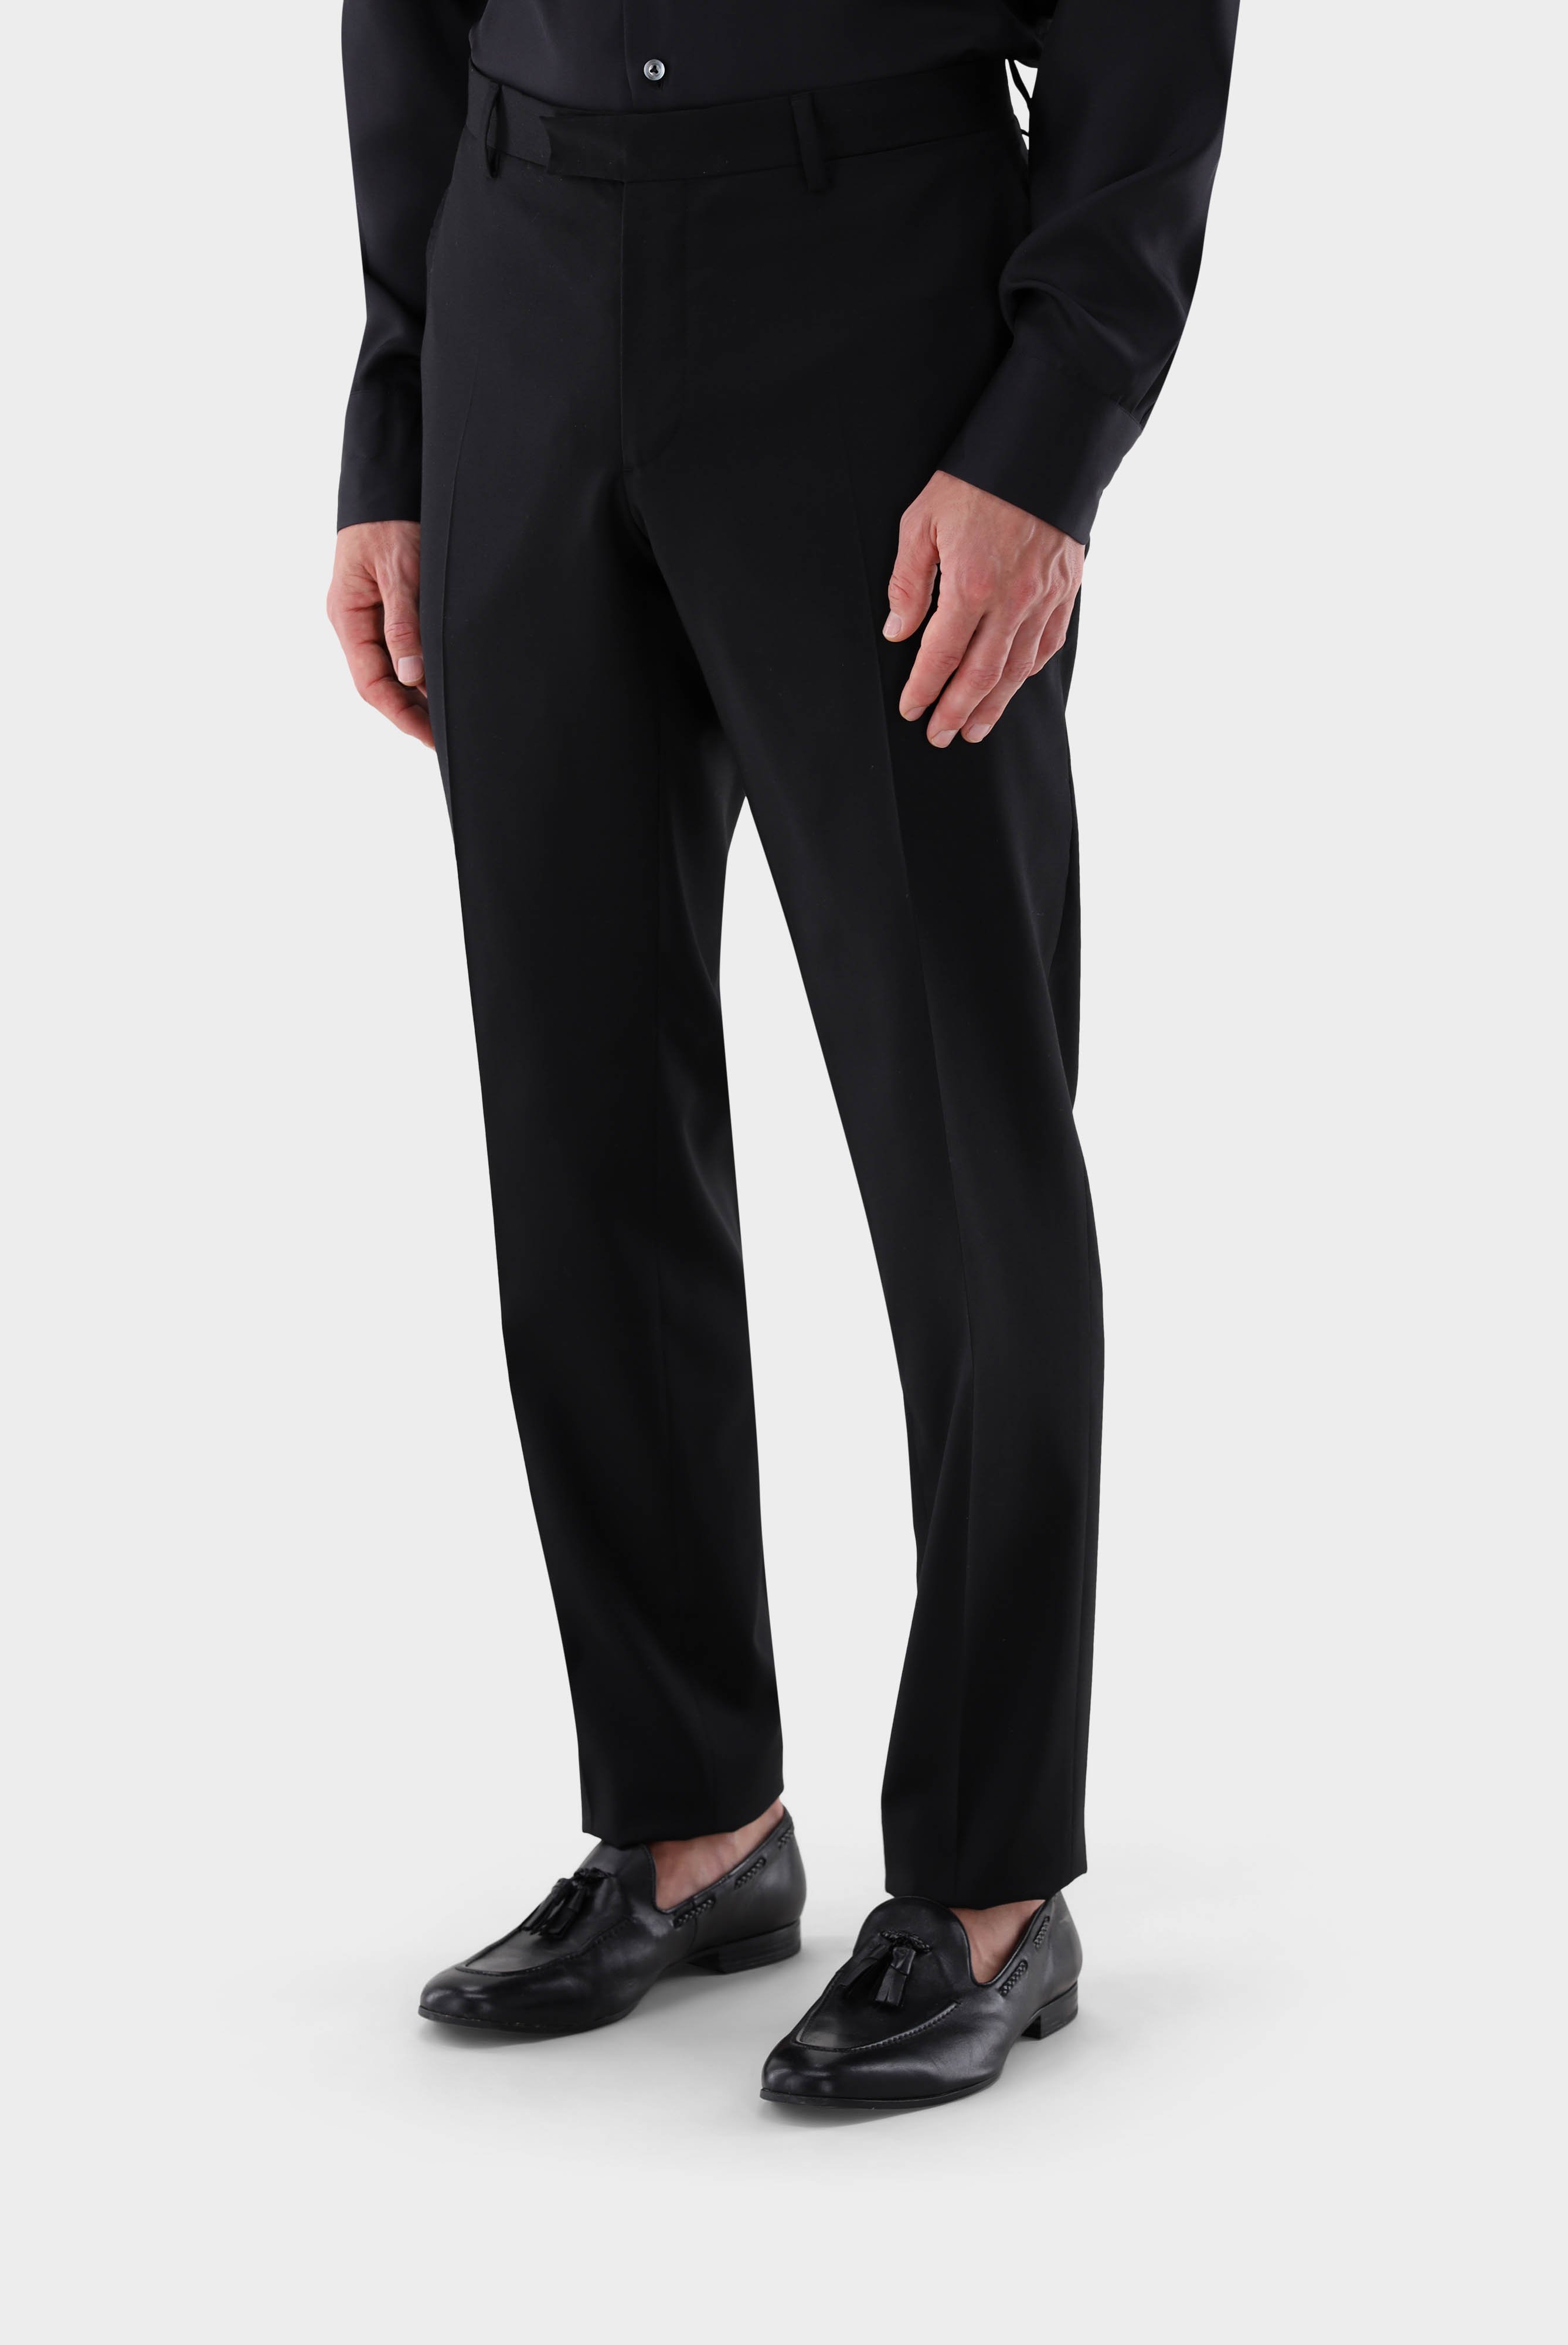 Jeans & Trousers+Wool Trousers Slim Fit+20.7880.16.H01010.099.23